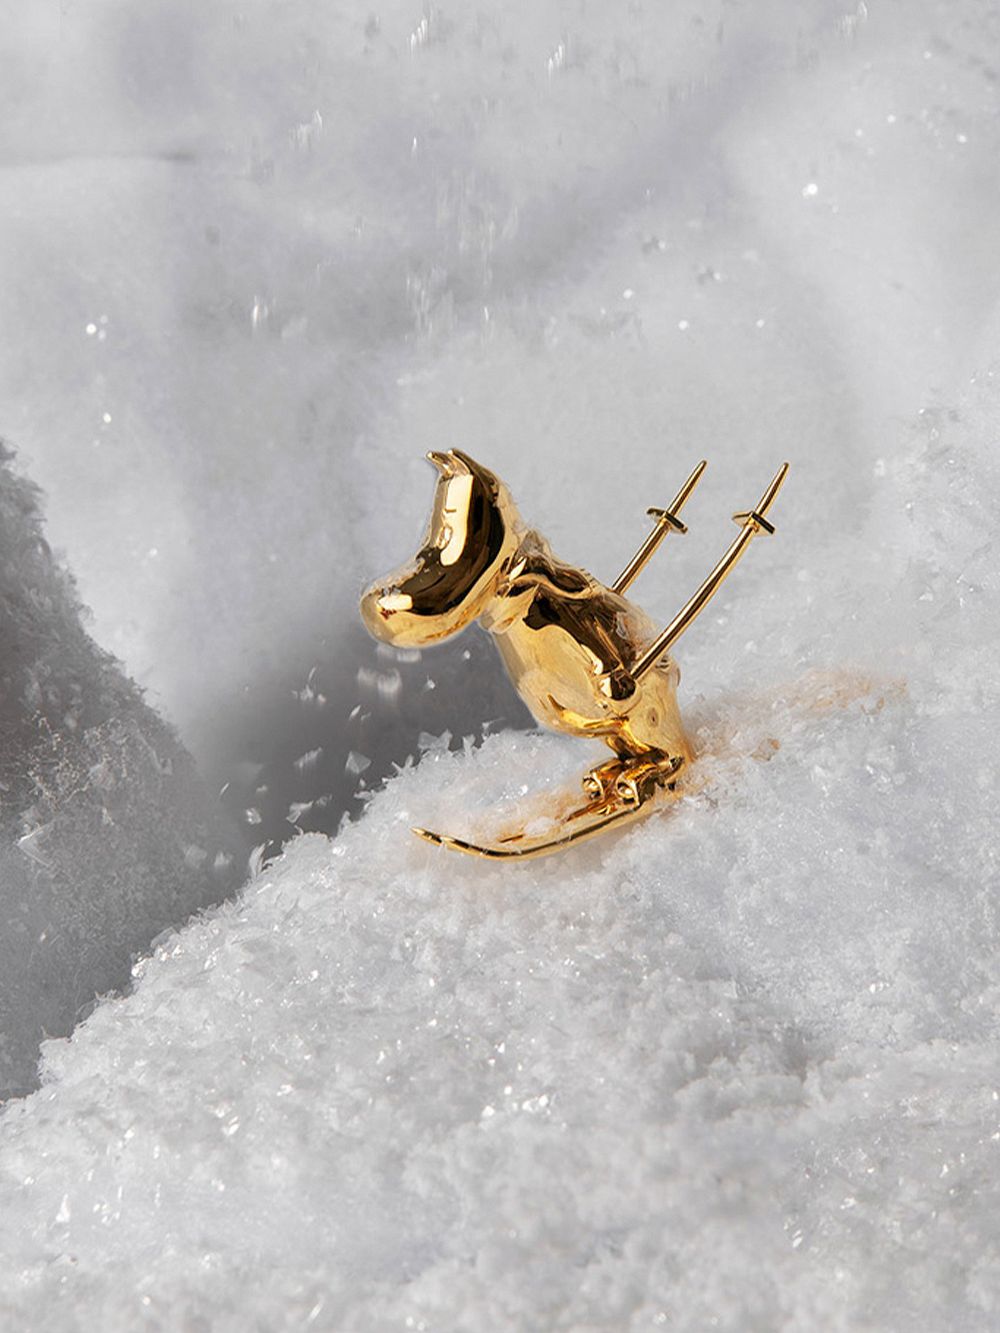 A gilded Moomintroll figurine skiing down a snowy slope.